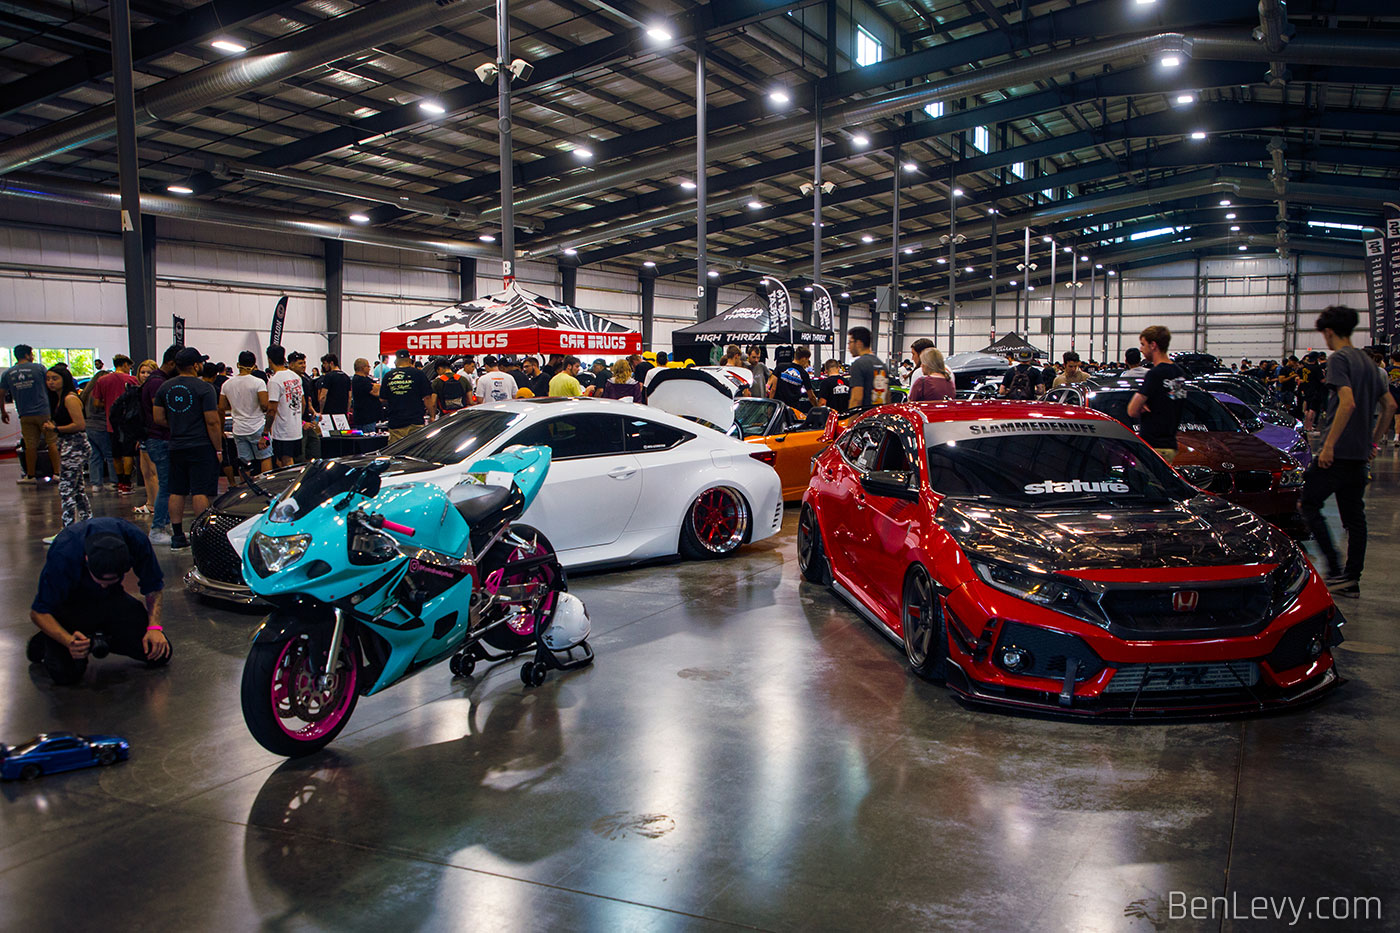 Slammedenuff Chicago Car Show at the Lake County Fairgrounds and Event Center